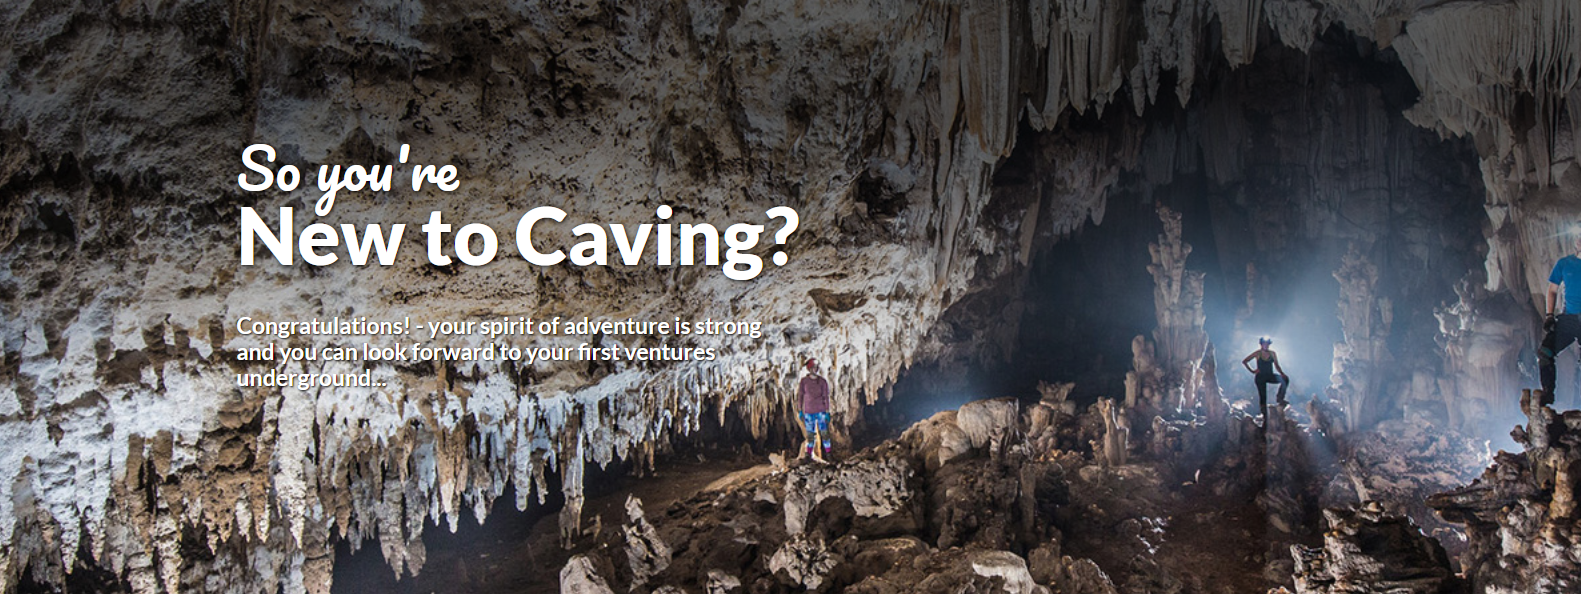 New To Caving?